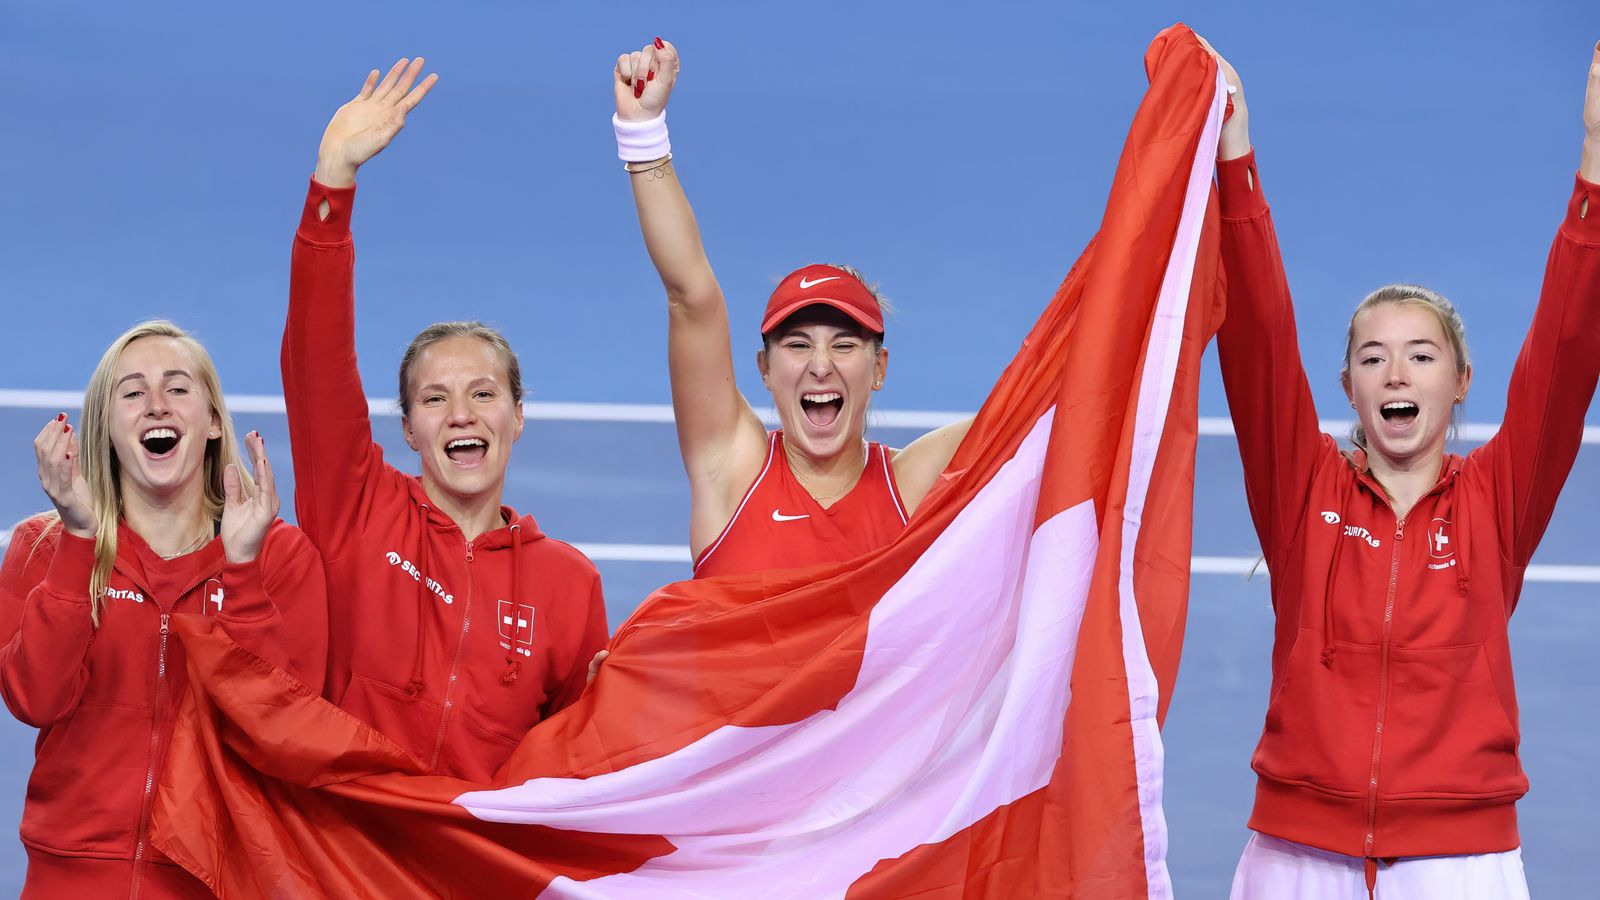 Billie Jean King Cup: Belinda Bencic and Jil Teichmann see Switzerland beat Australia and win title for first time